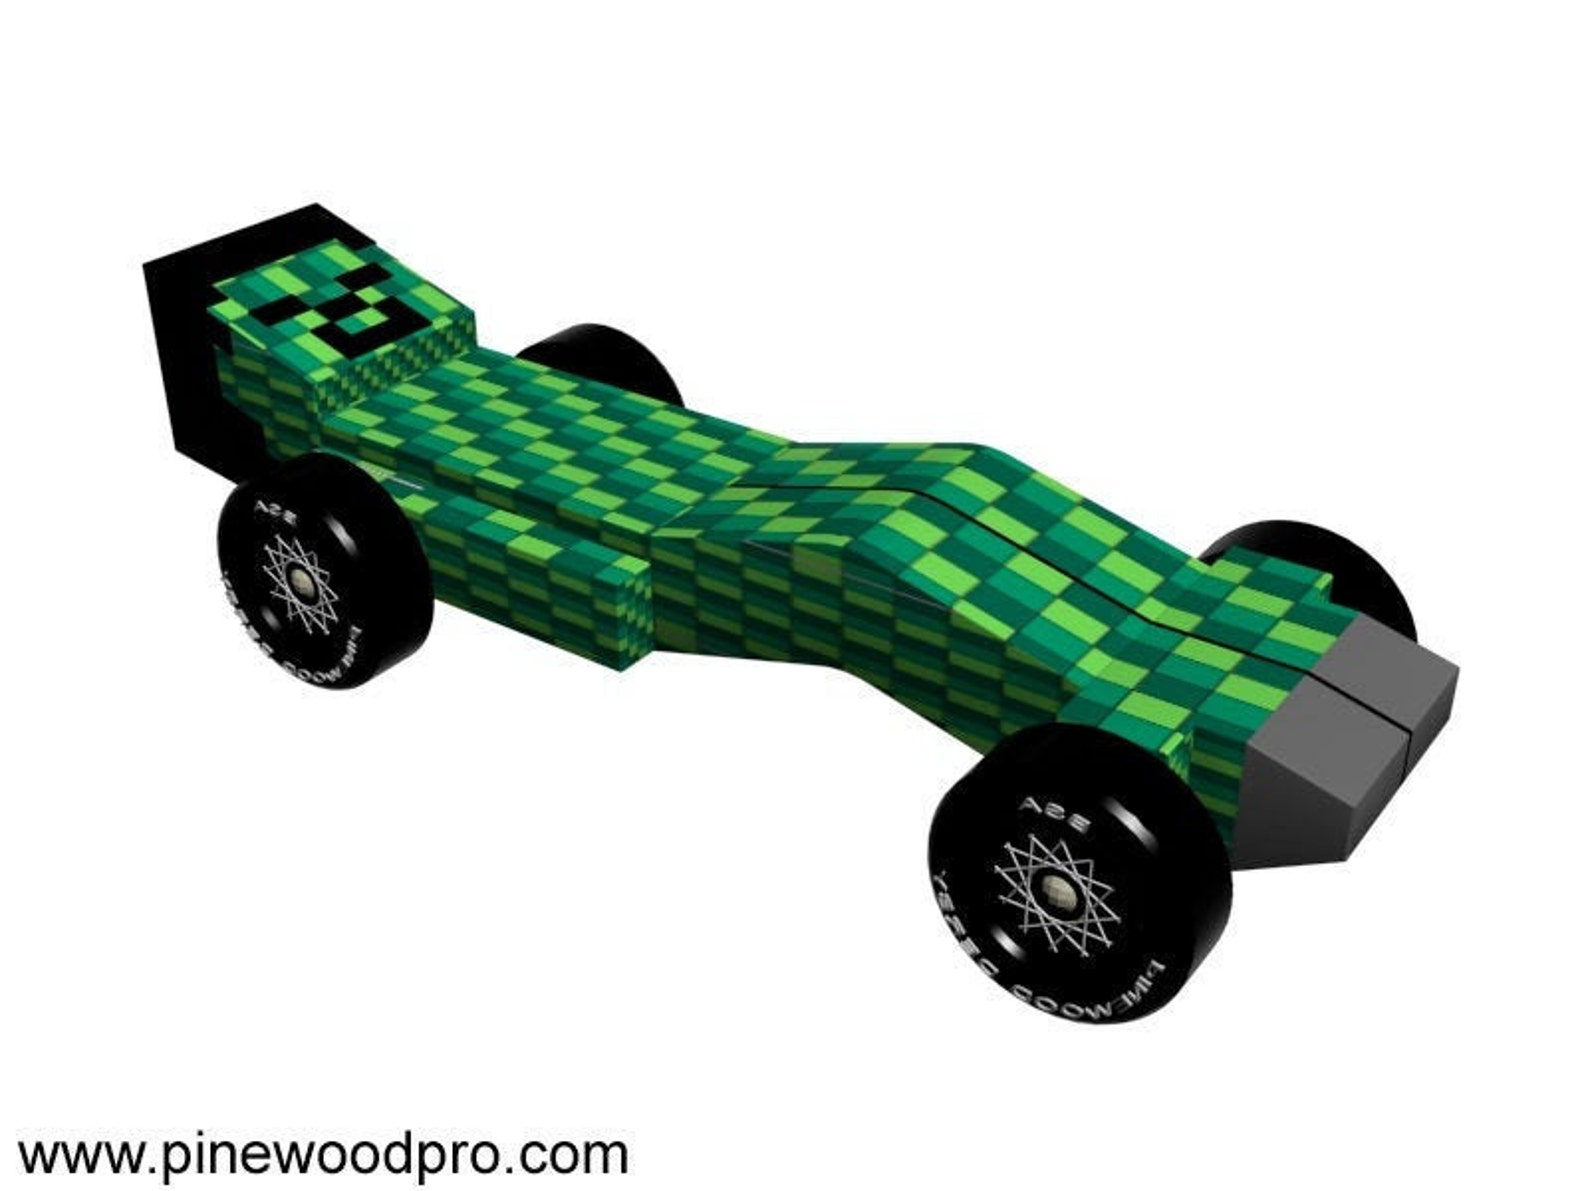 minecraft-pinewood-derby-car-design-plan-how-to-cut-out-a-etsy